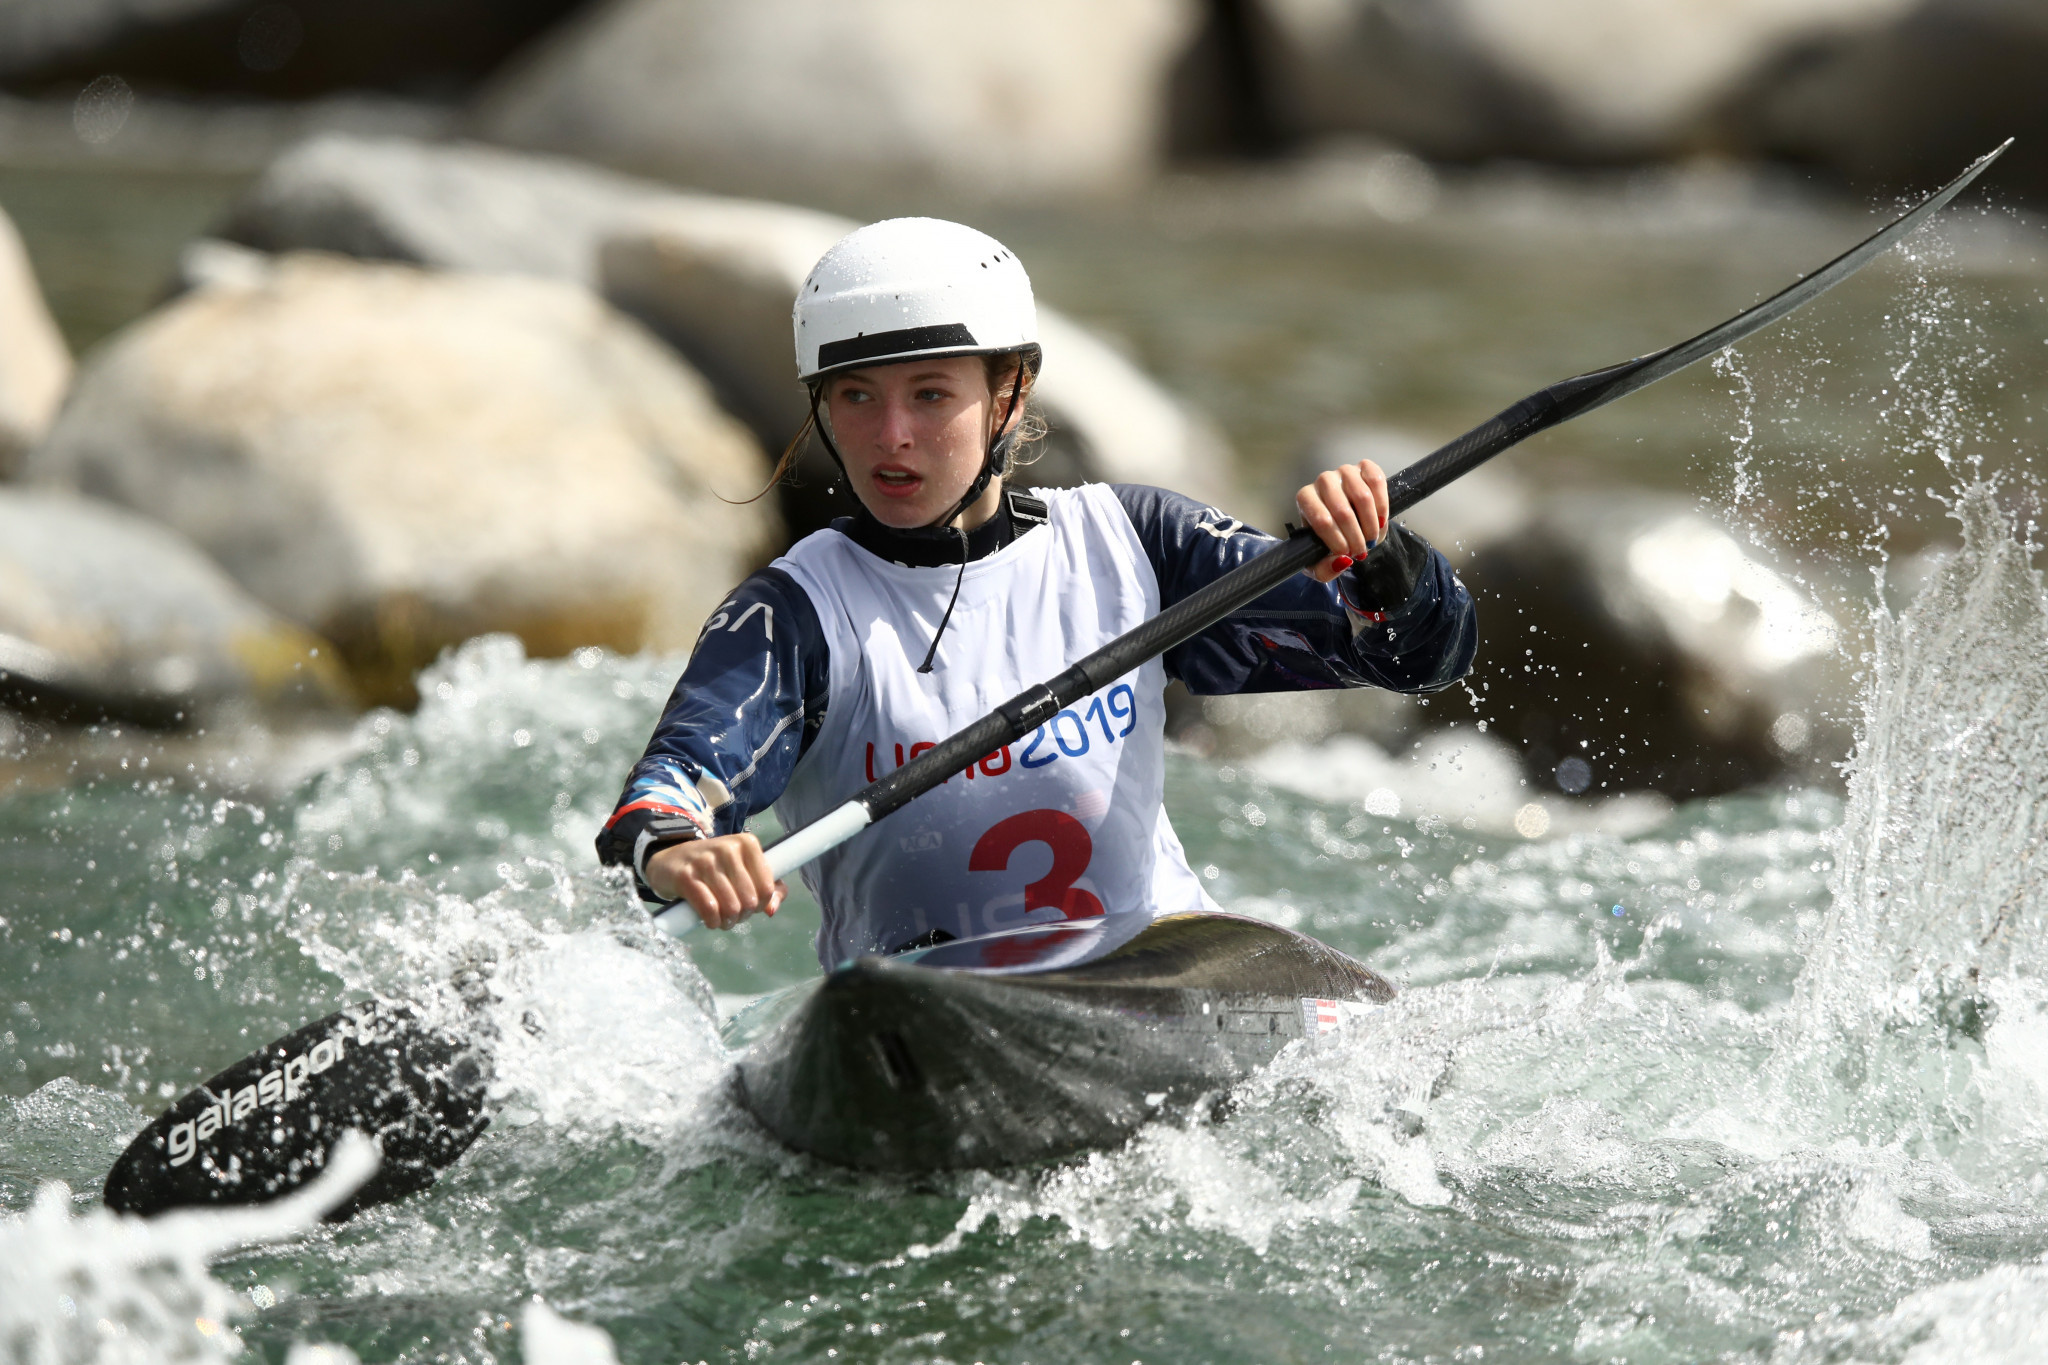 Evy Leibfarth finished in the top three for the women's kayak and canoeing events ©Getty Images